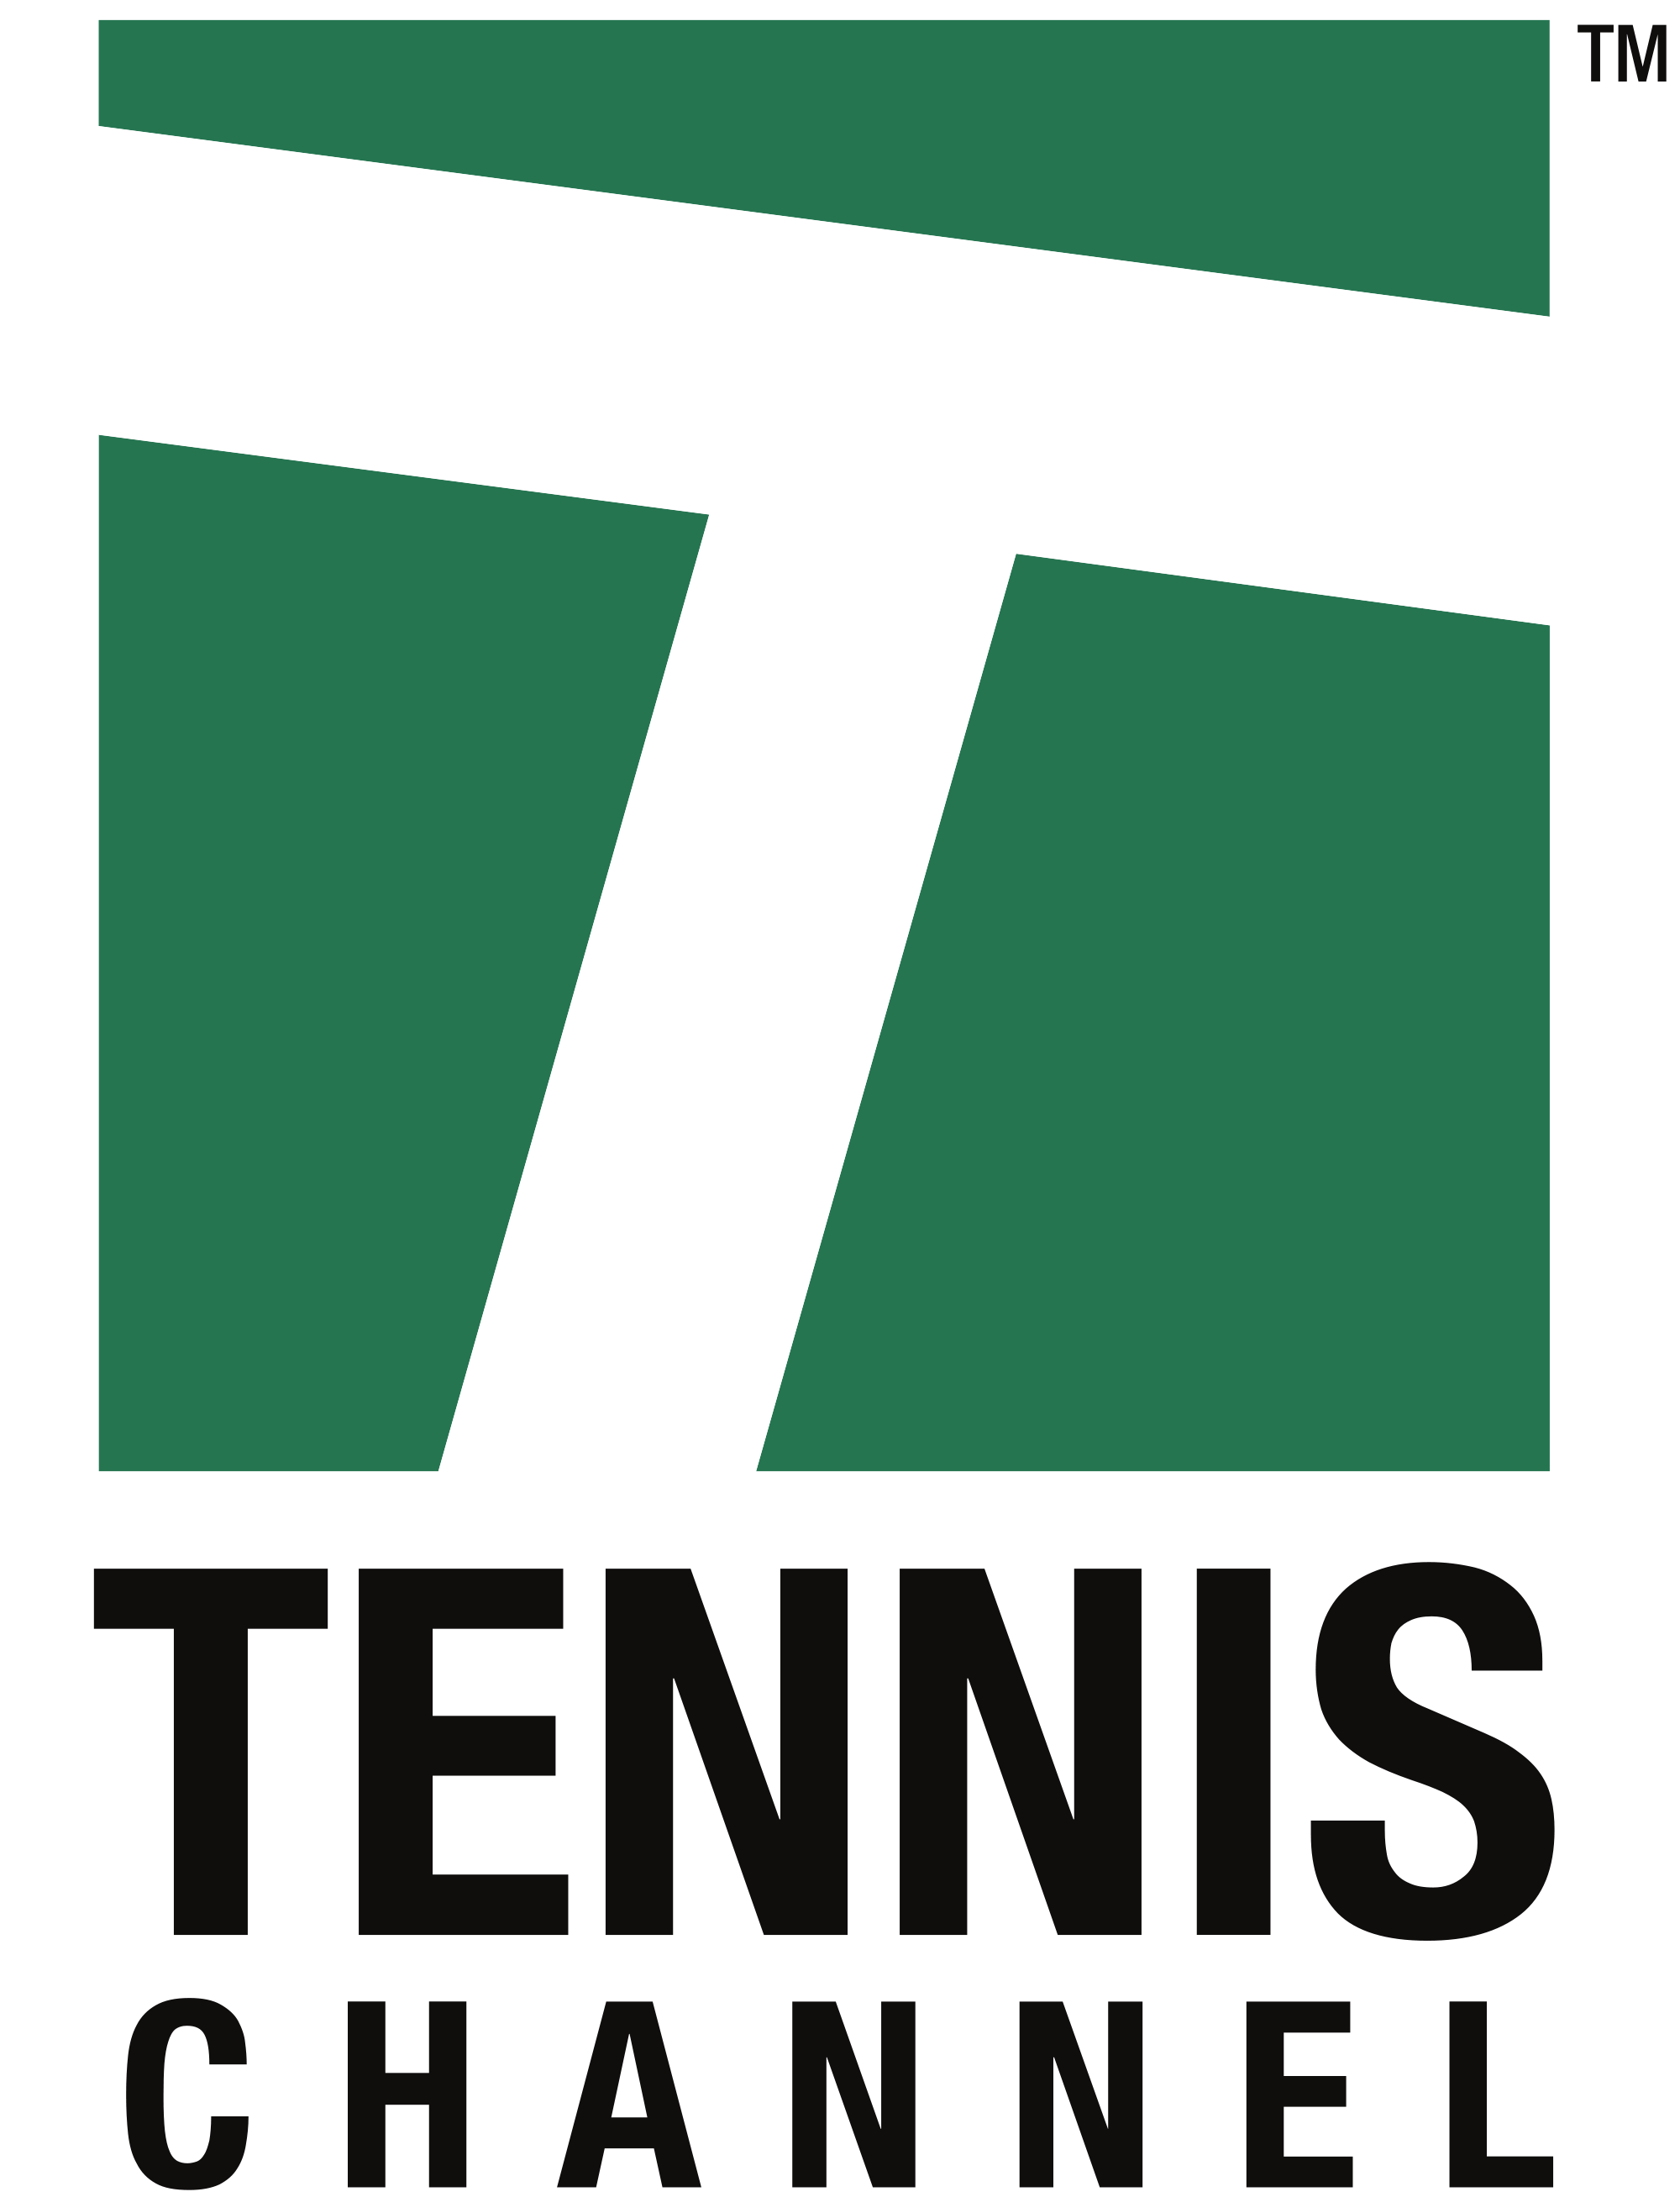 2000px-Tennis_Channel_logo.svg.png